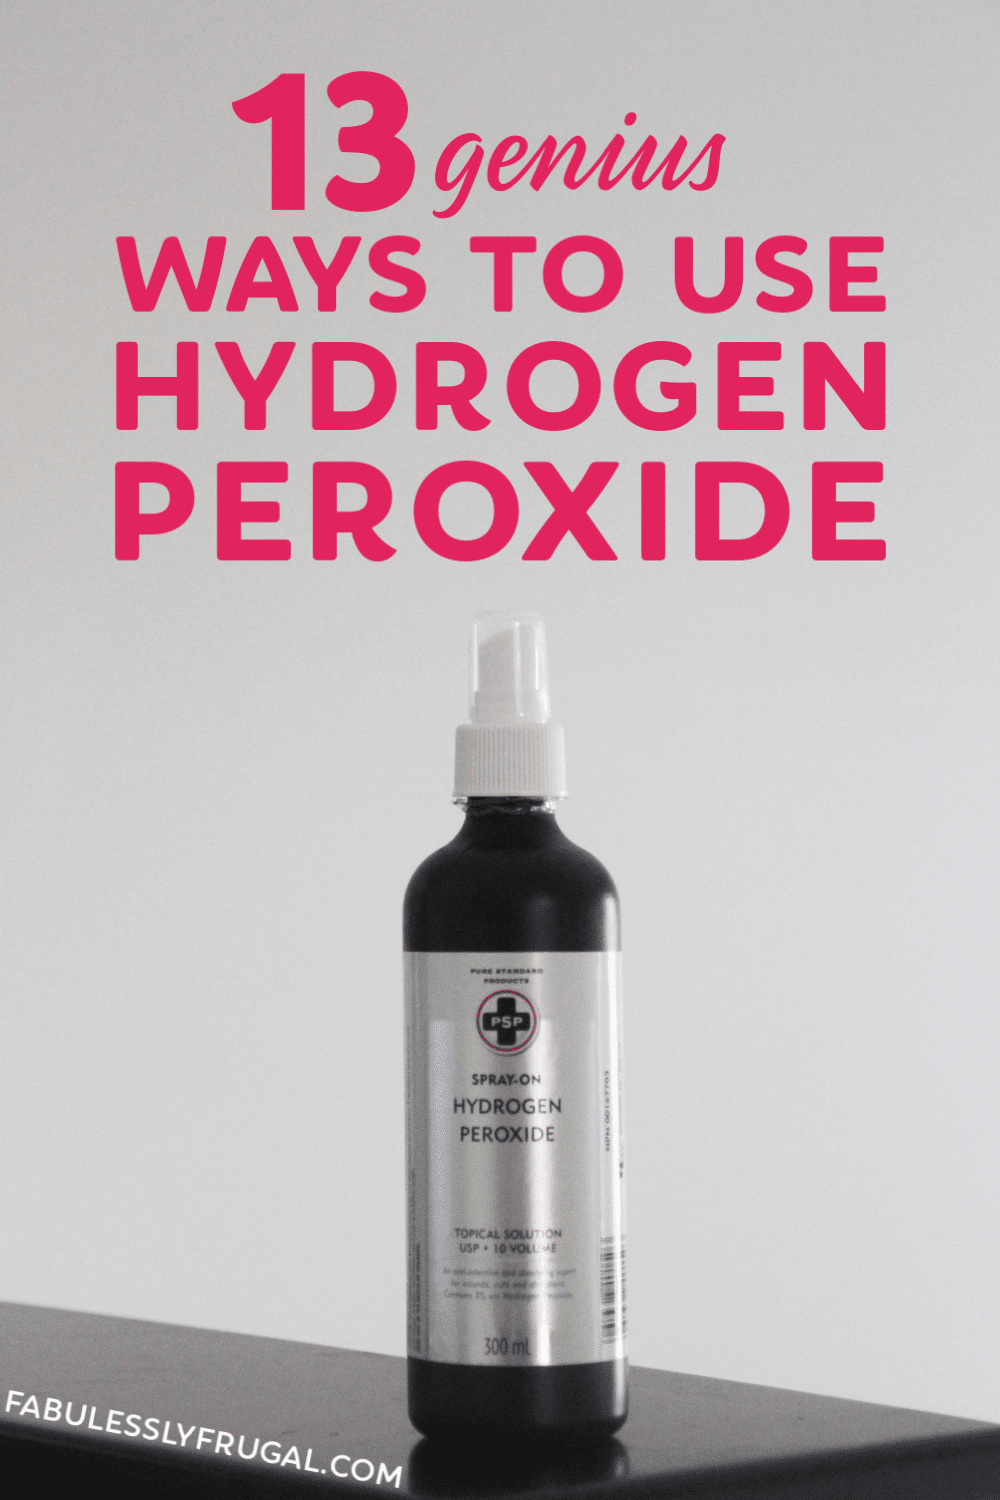 Ways to use hydrogen peroxide